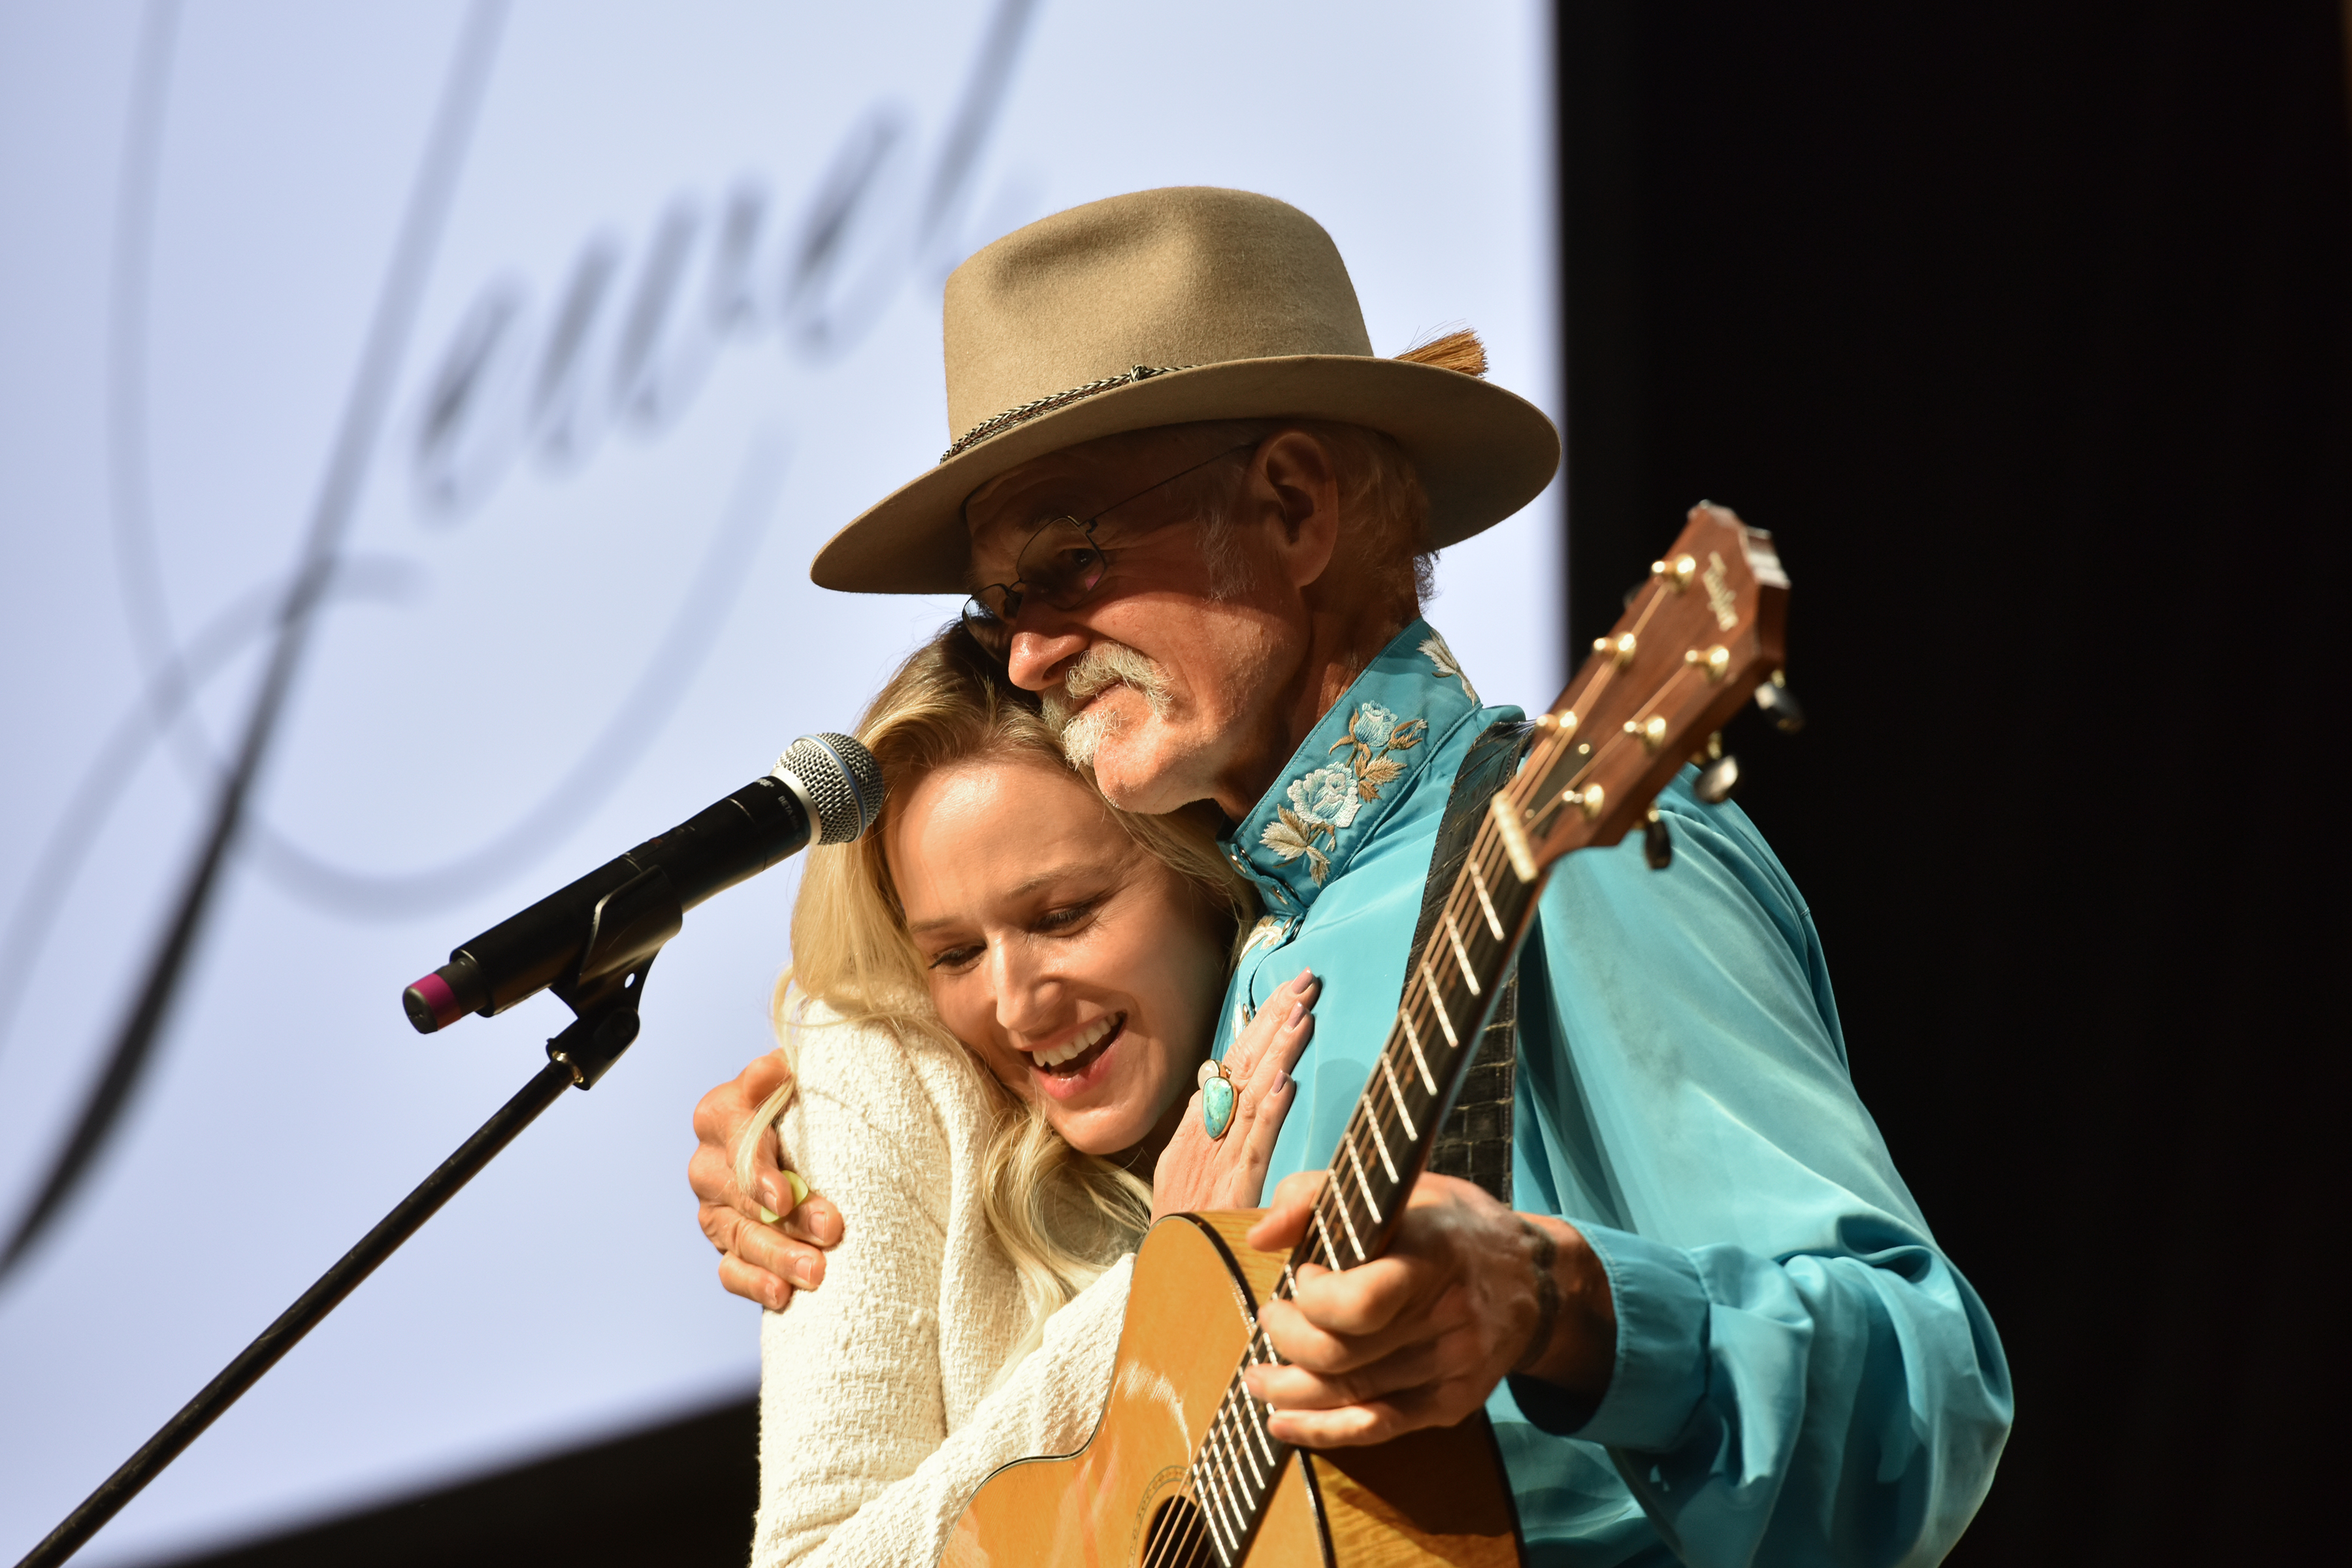 Jewel with her father, Atz Kilcher, on stage during the first day of the Wellness Your Way Festival in Denver, Colorado, on August 16, 2019. | Source: Getty Images